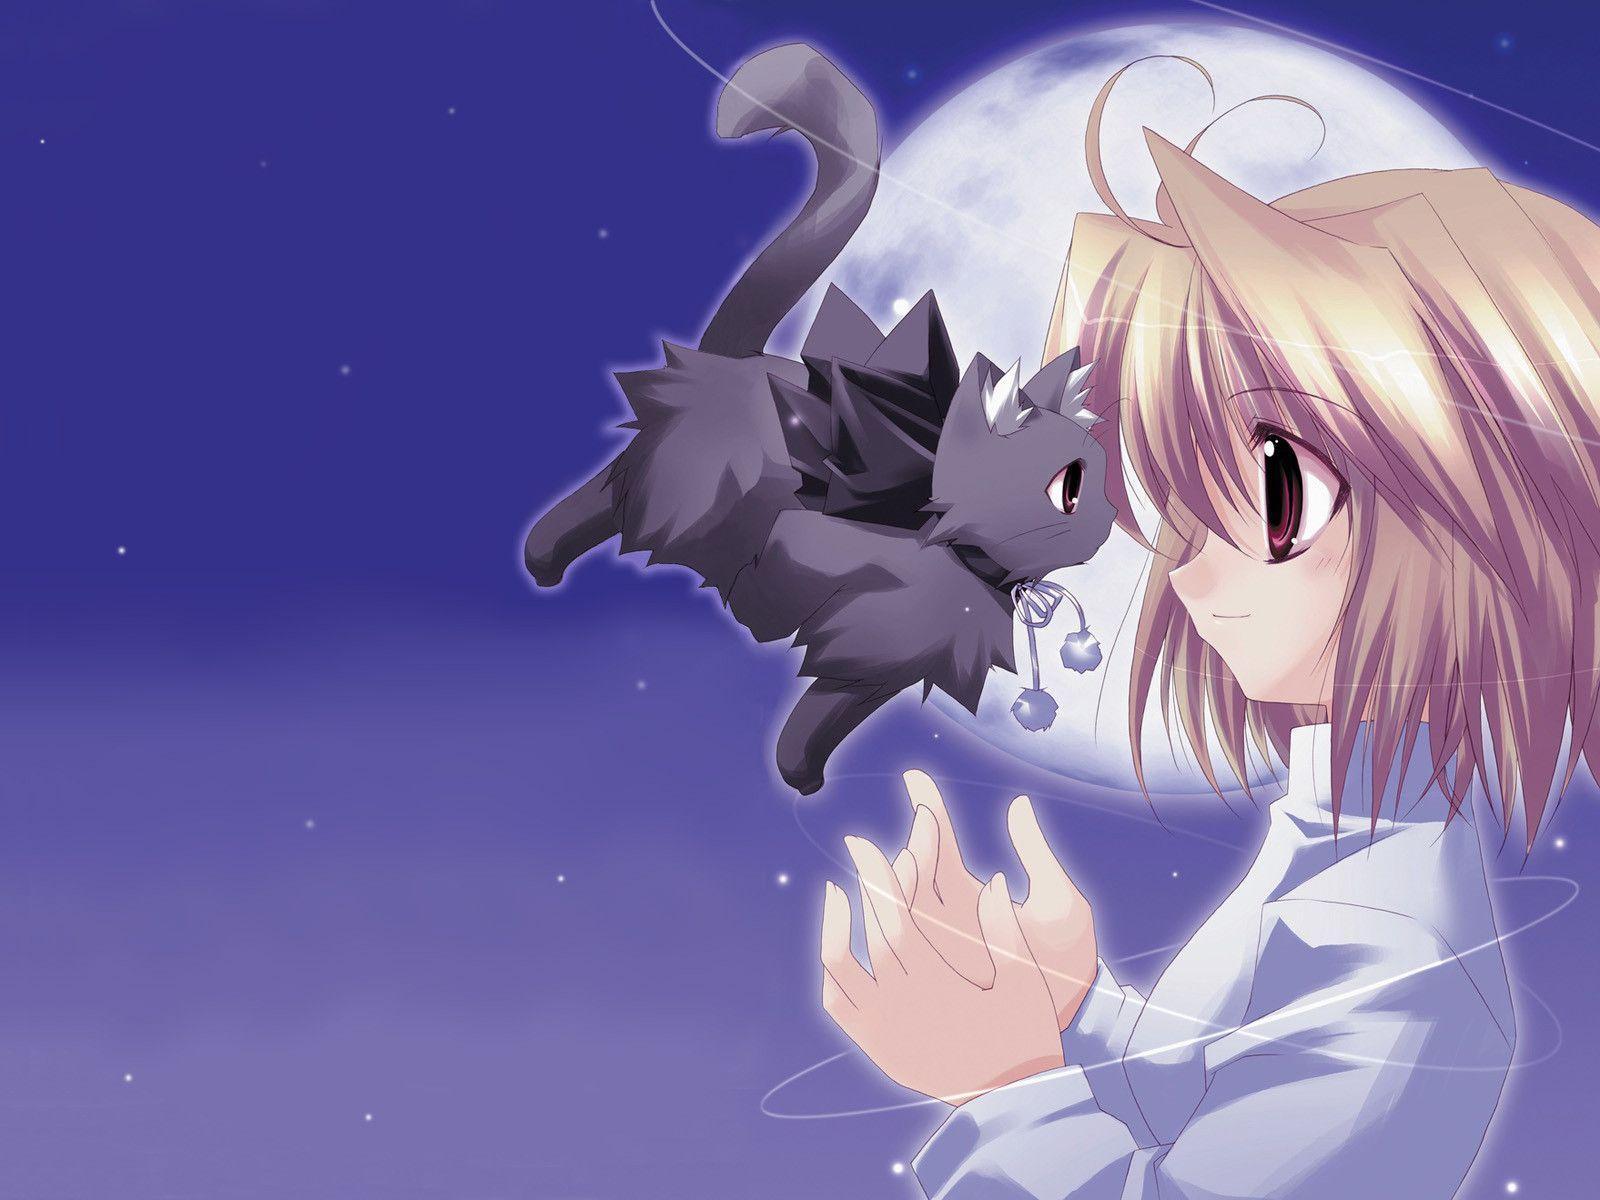 Wallpapers Anime Cute - Wallpaper Cave